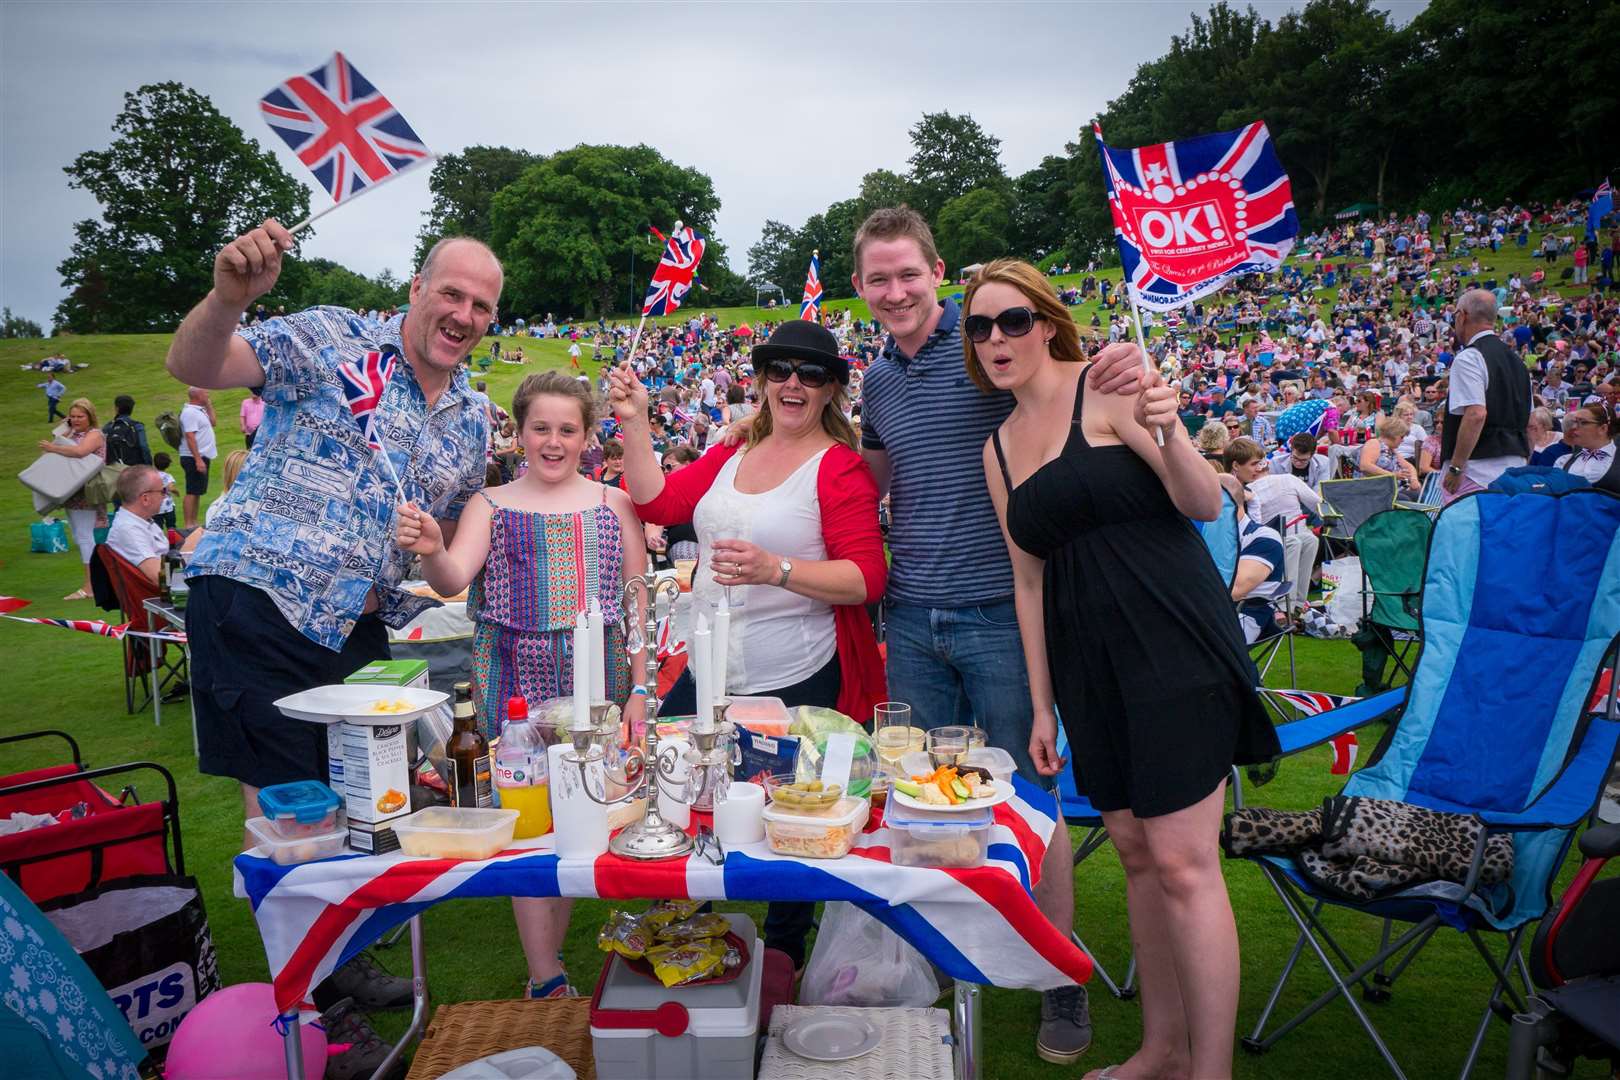 Win tickets to take the whole family to the Leeds Castle Concert. Picture: Big Plan Group